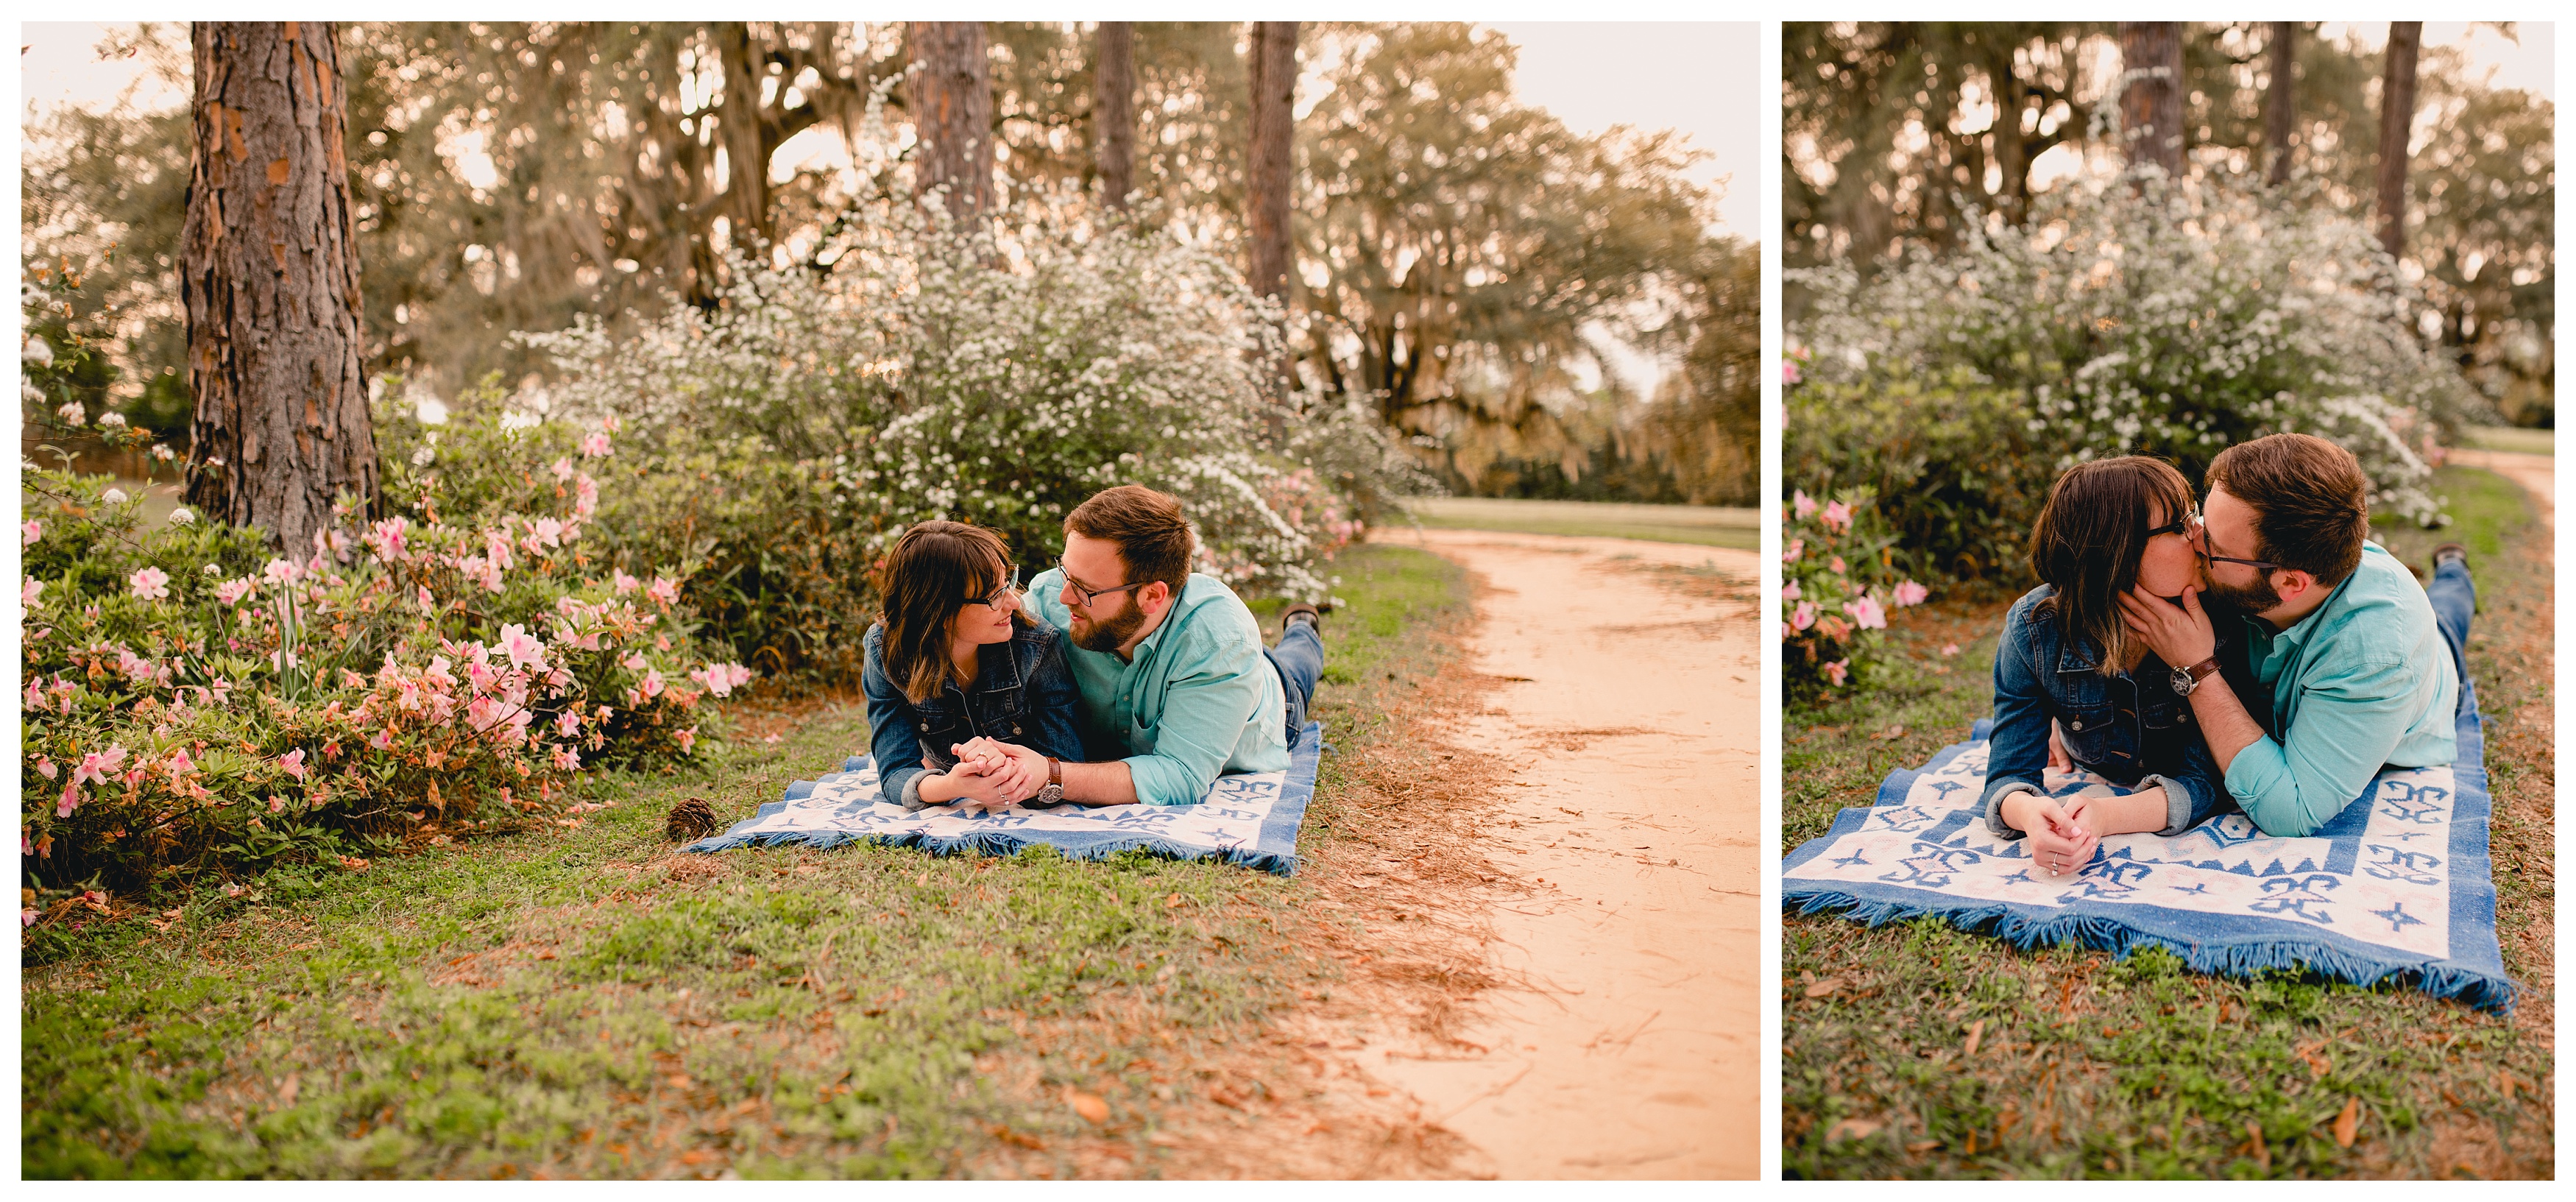 Intimate and fun engagement pictures by Tallahassee professional photographer. Shelly Williams Photography